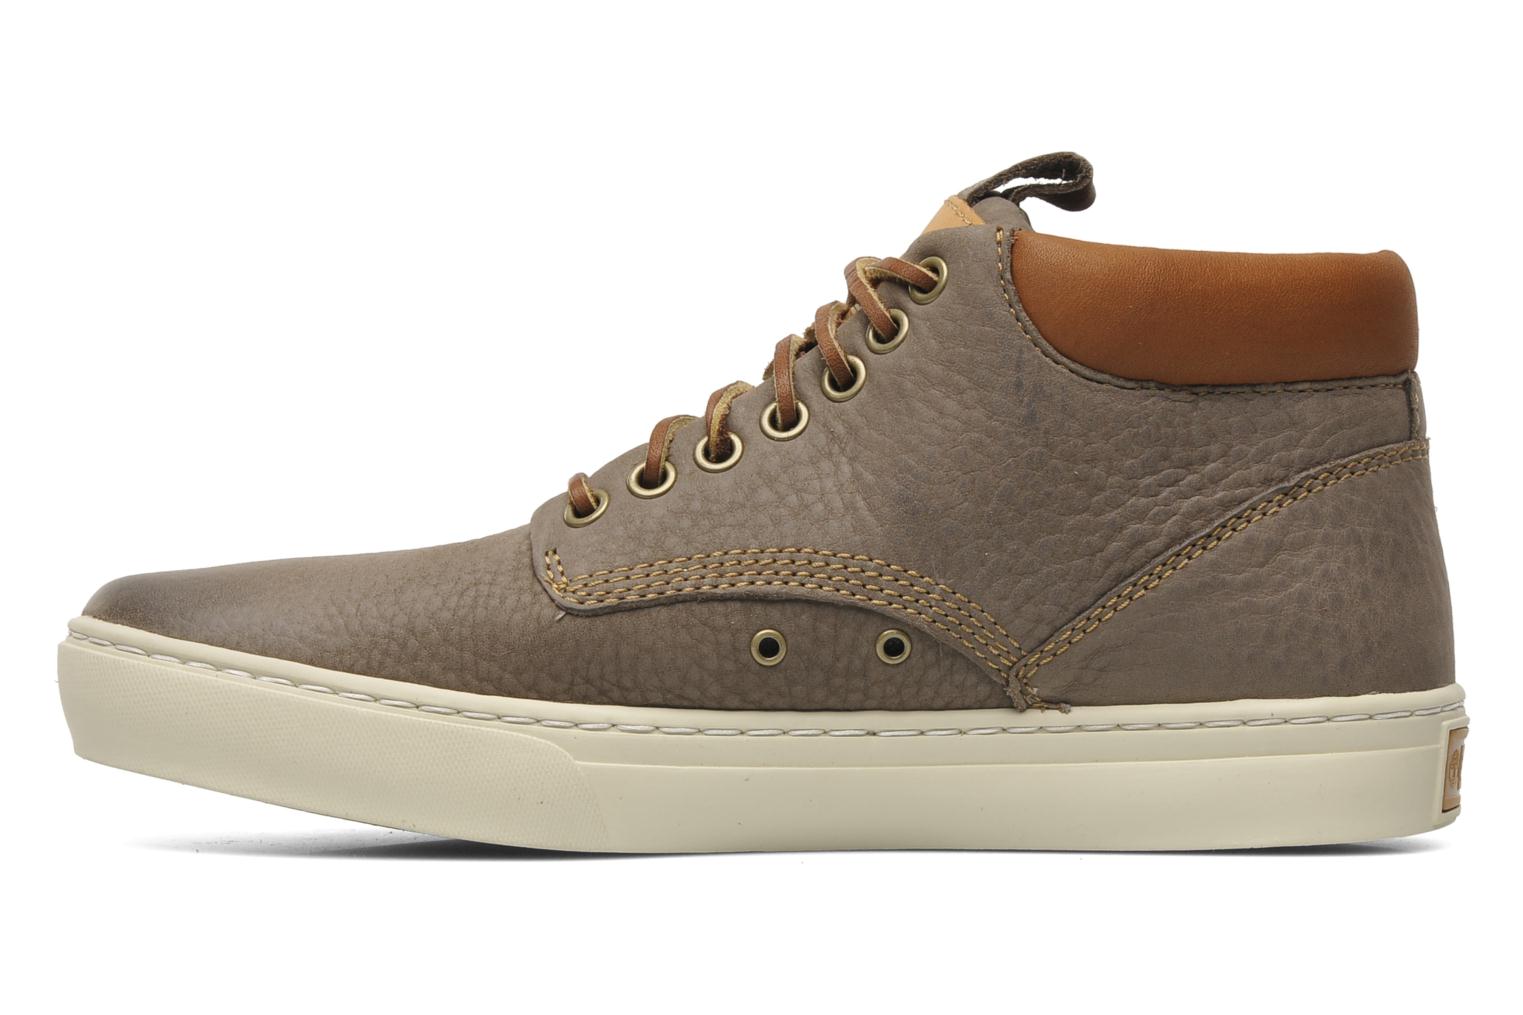 Timberland Earthkeepers 2.0 Cupsole Chukka Trainers in Grey at Sarenza ...